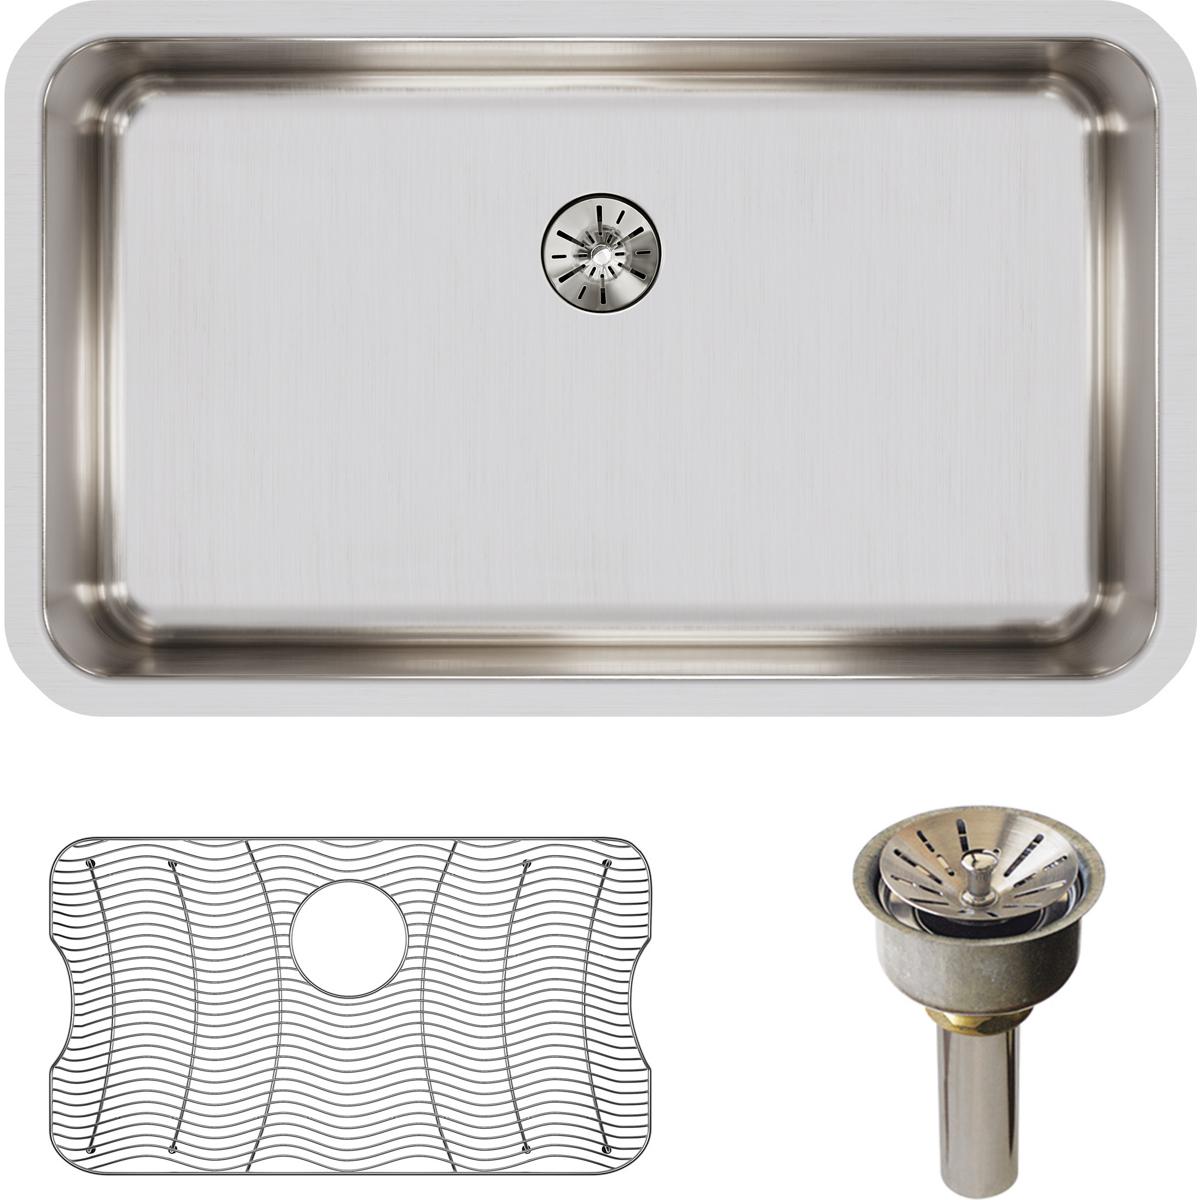 Elkay Lustertone Classic Stainless Steel 30-1/2" x 18-1/2" x 7-1/2" Single Bowl Undermount Sink Kit with Perfect Drain